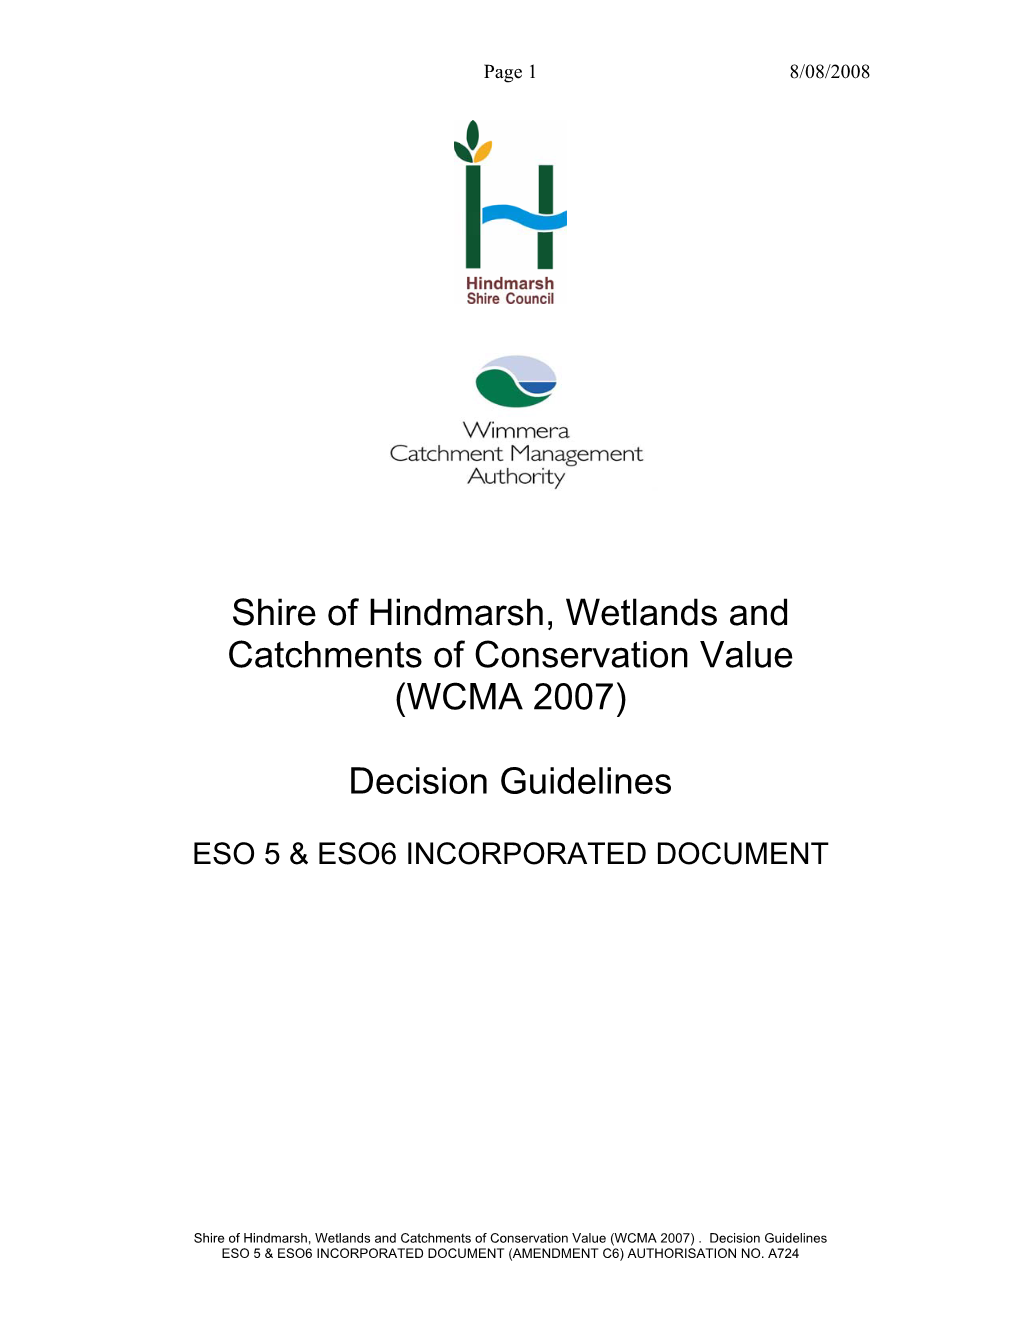 Shire of Hindmarsh, Wetlands and Catchments of Conservation Value (WCMA 2007)